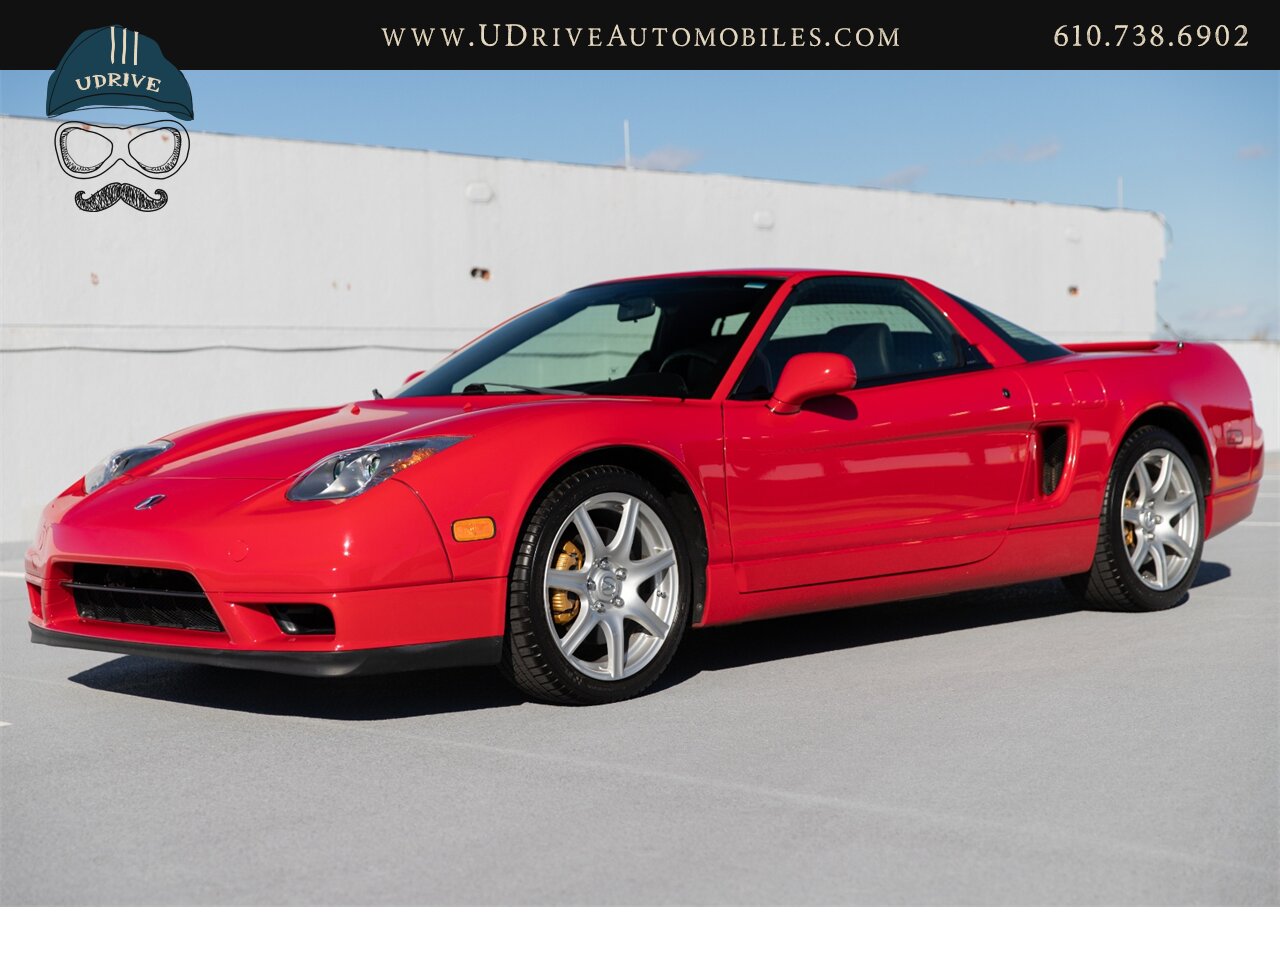 2004 Acura NSX NSX-T 21k mIles Red over Black  Fresh Timing Belt Service - Photo 9 - West Chester, PA 19382